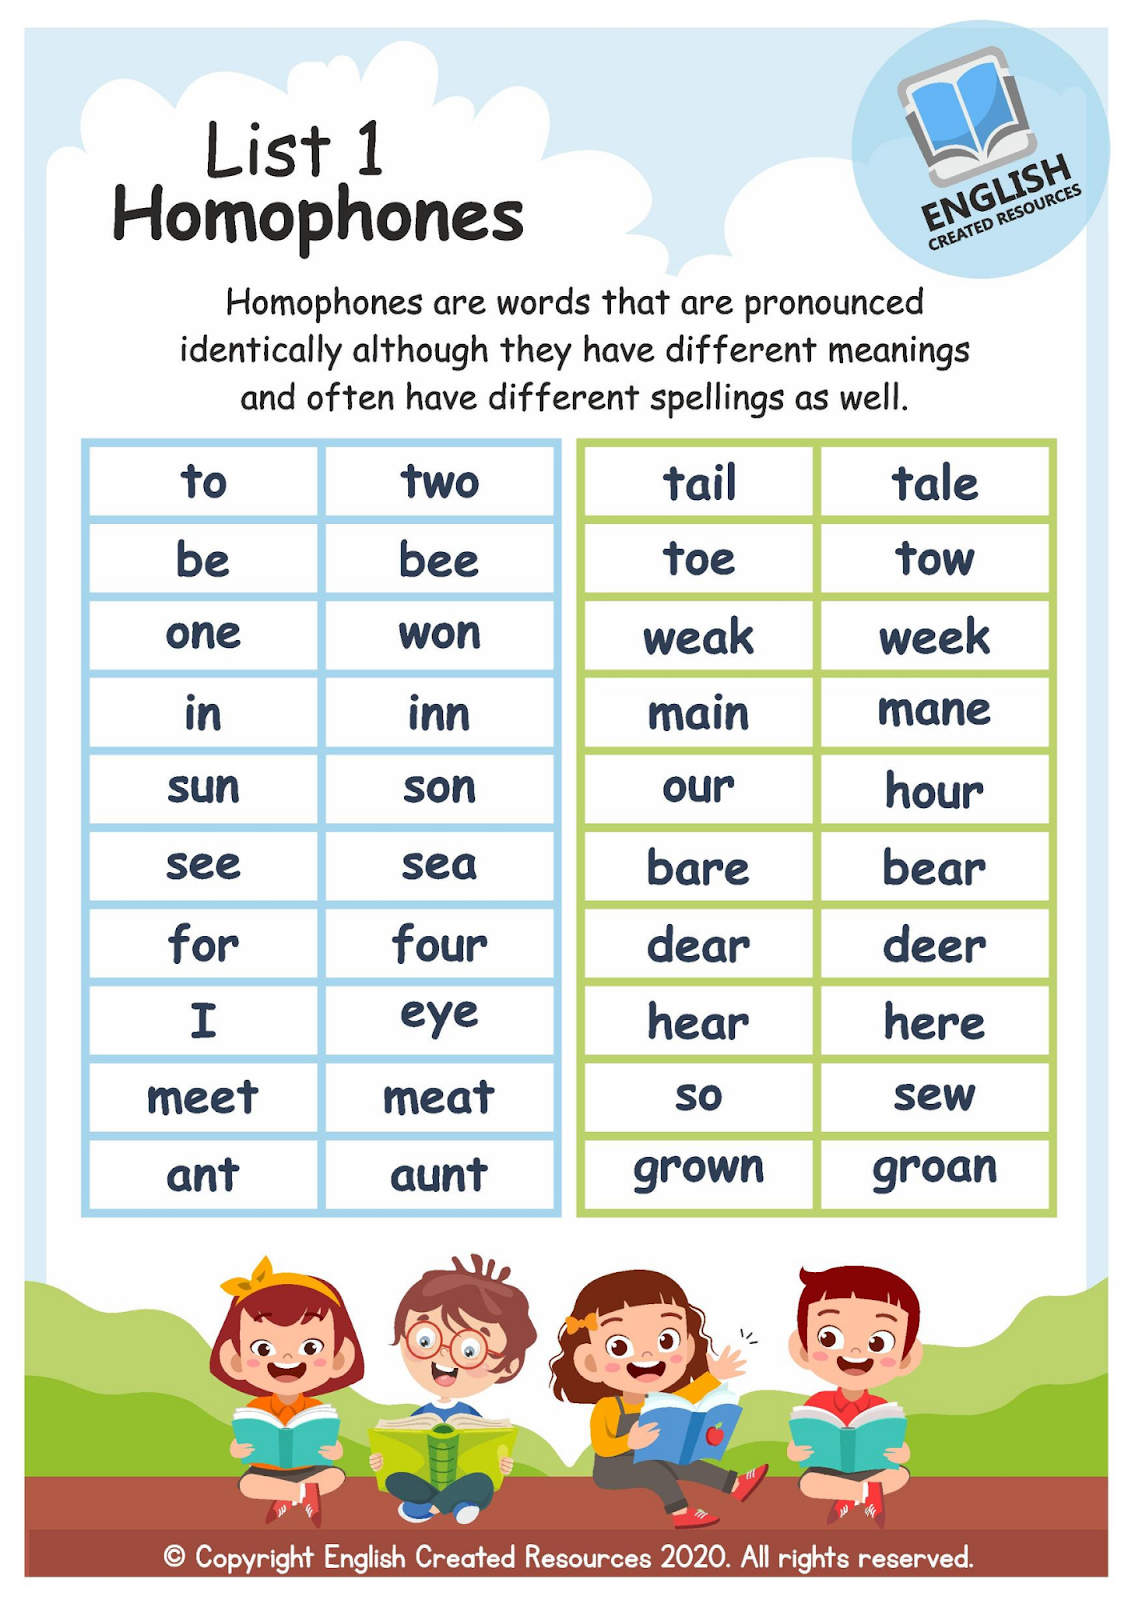 homophones-worksheets-english-created-resources-search-results-for